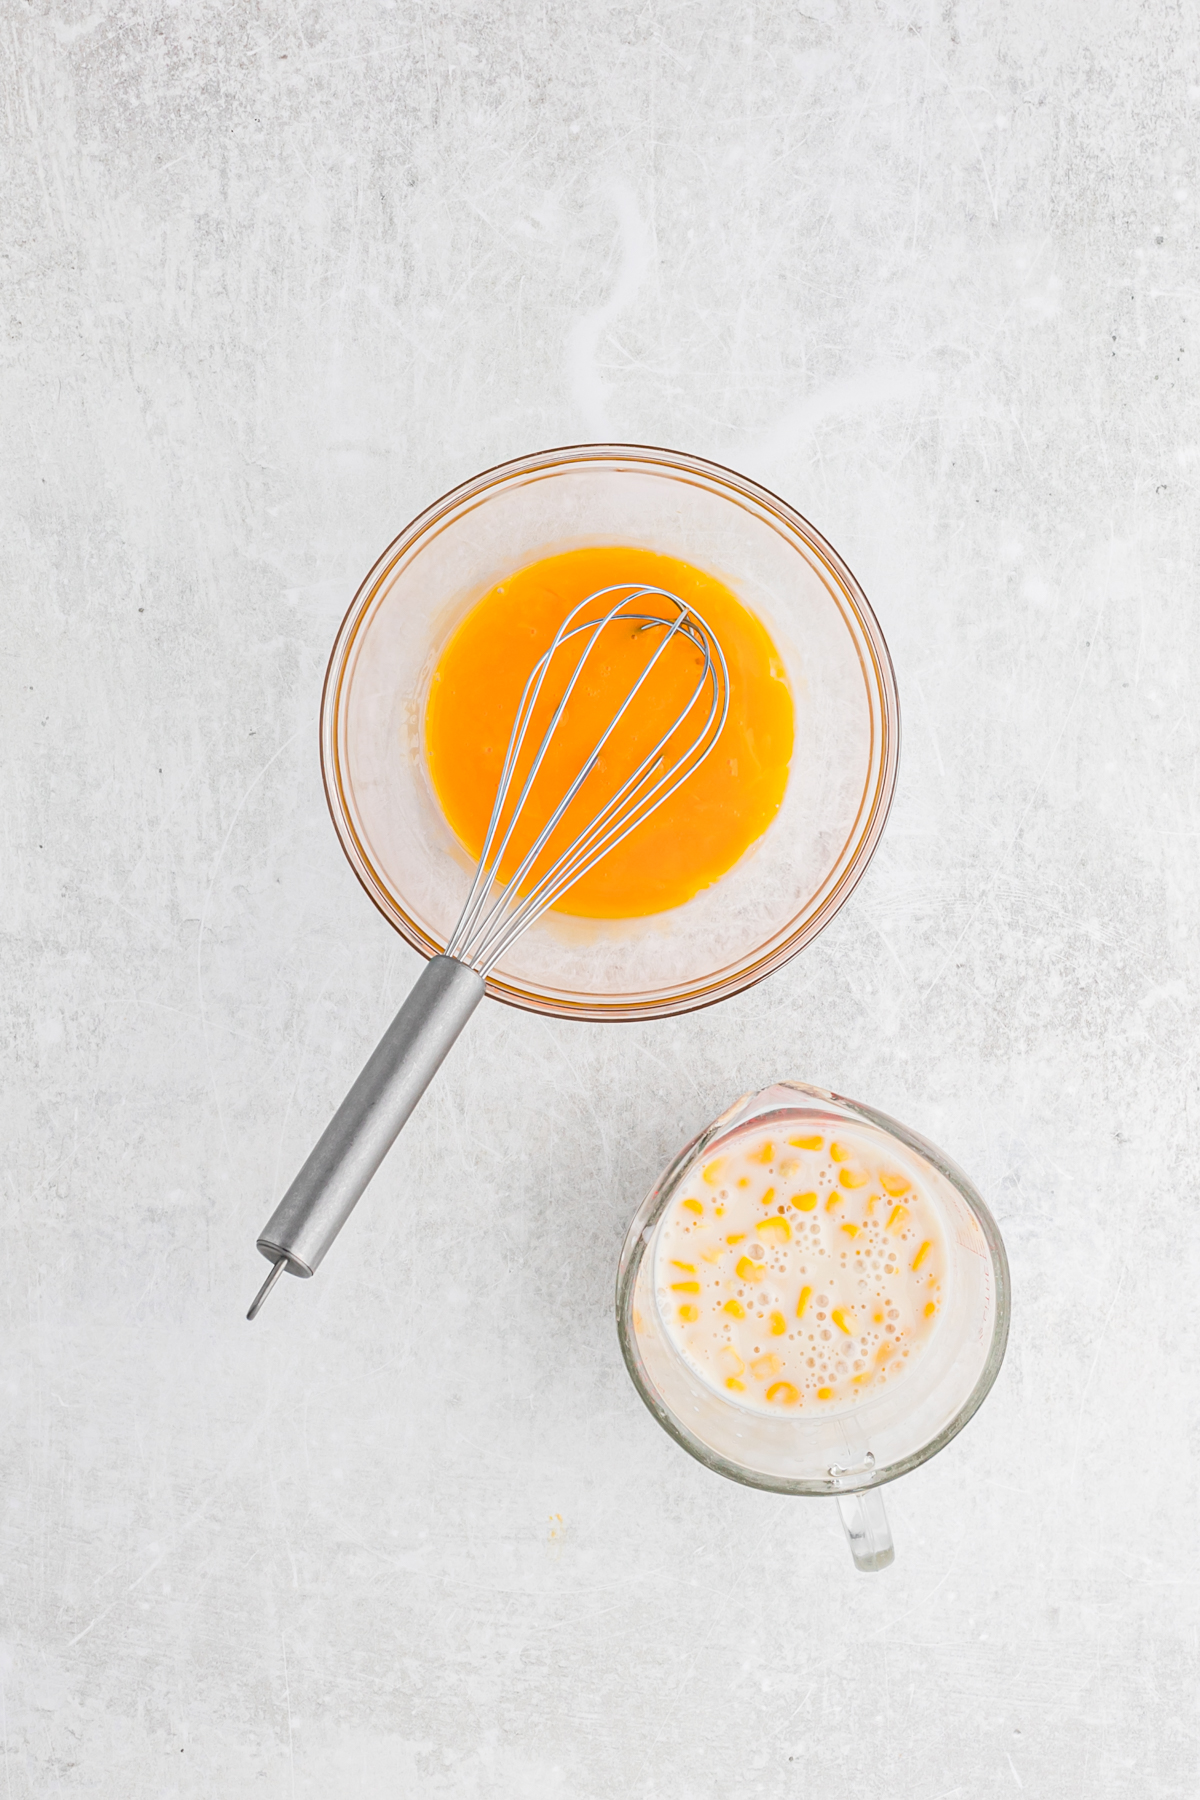 Egg yolks whisked together in a clear bowl